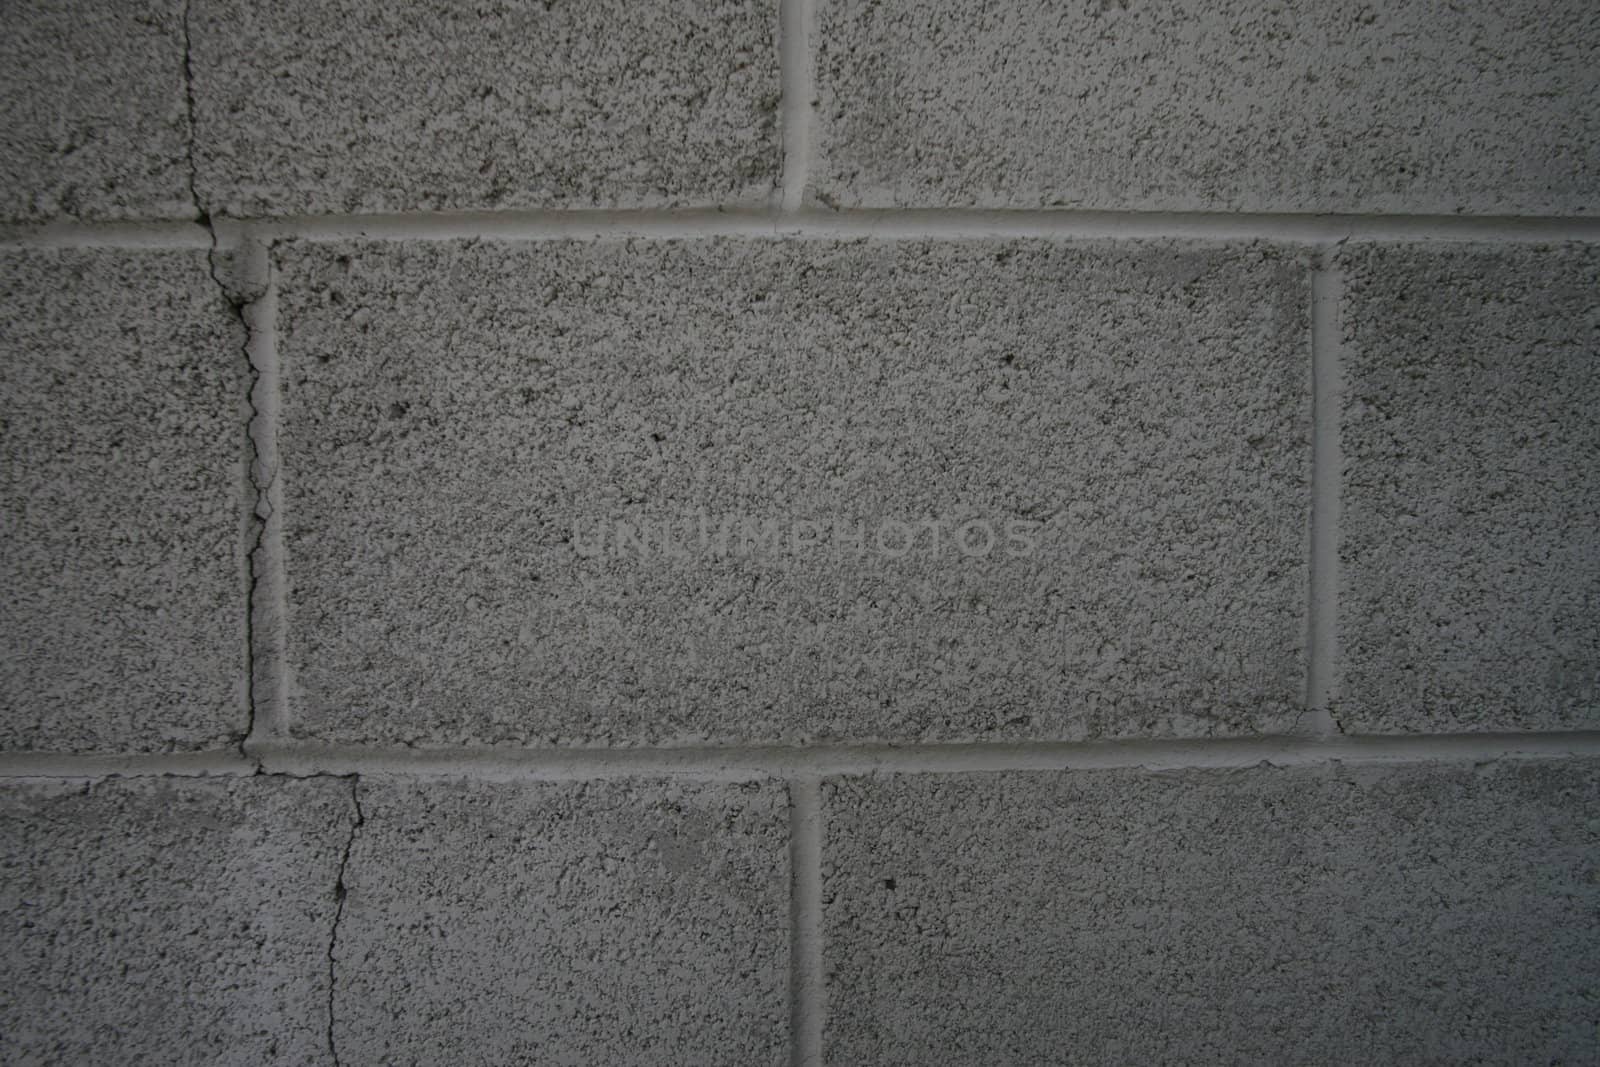 Close up of bricks/concrete. Would make a great background.